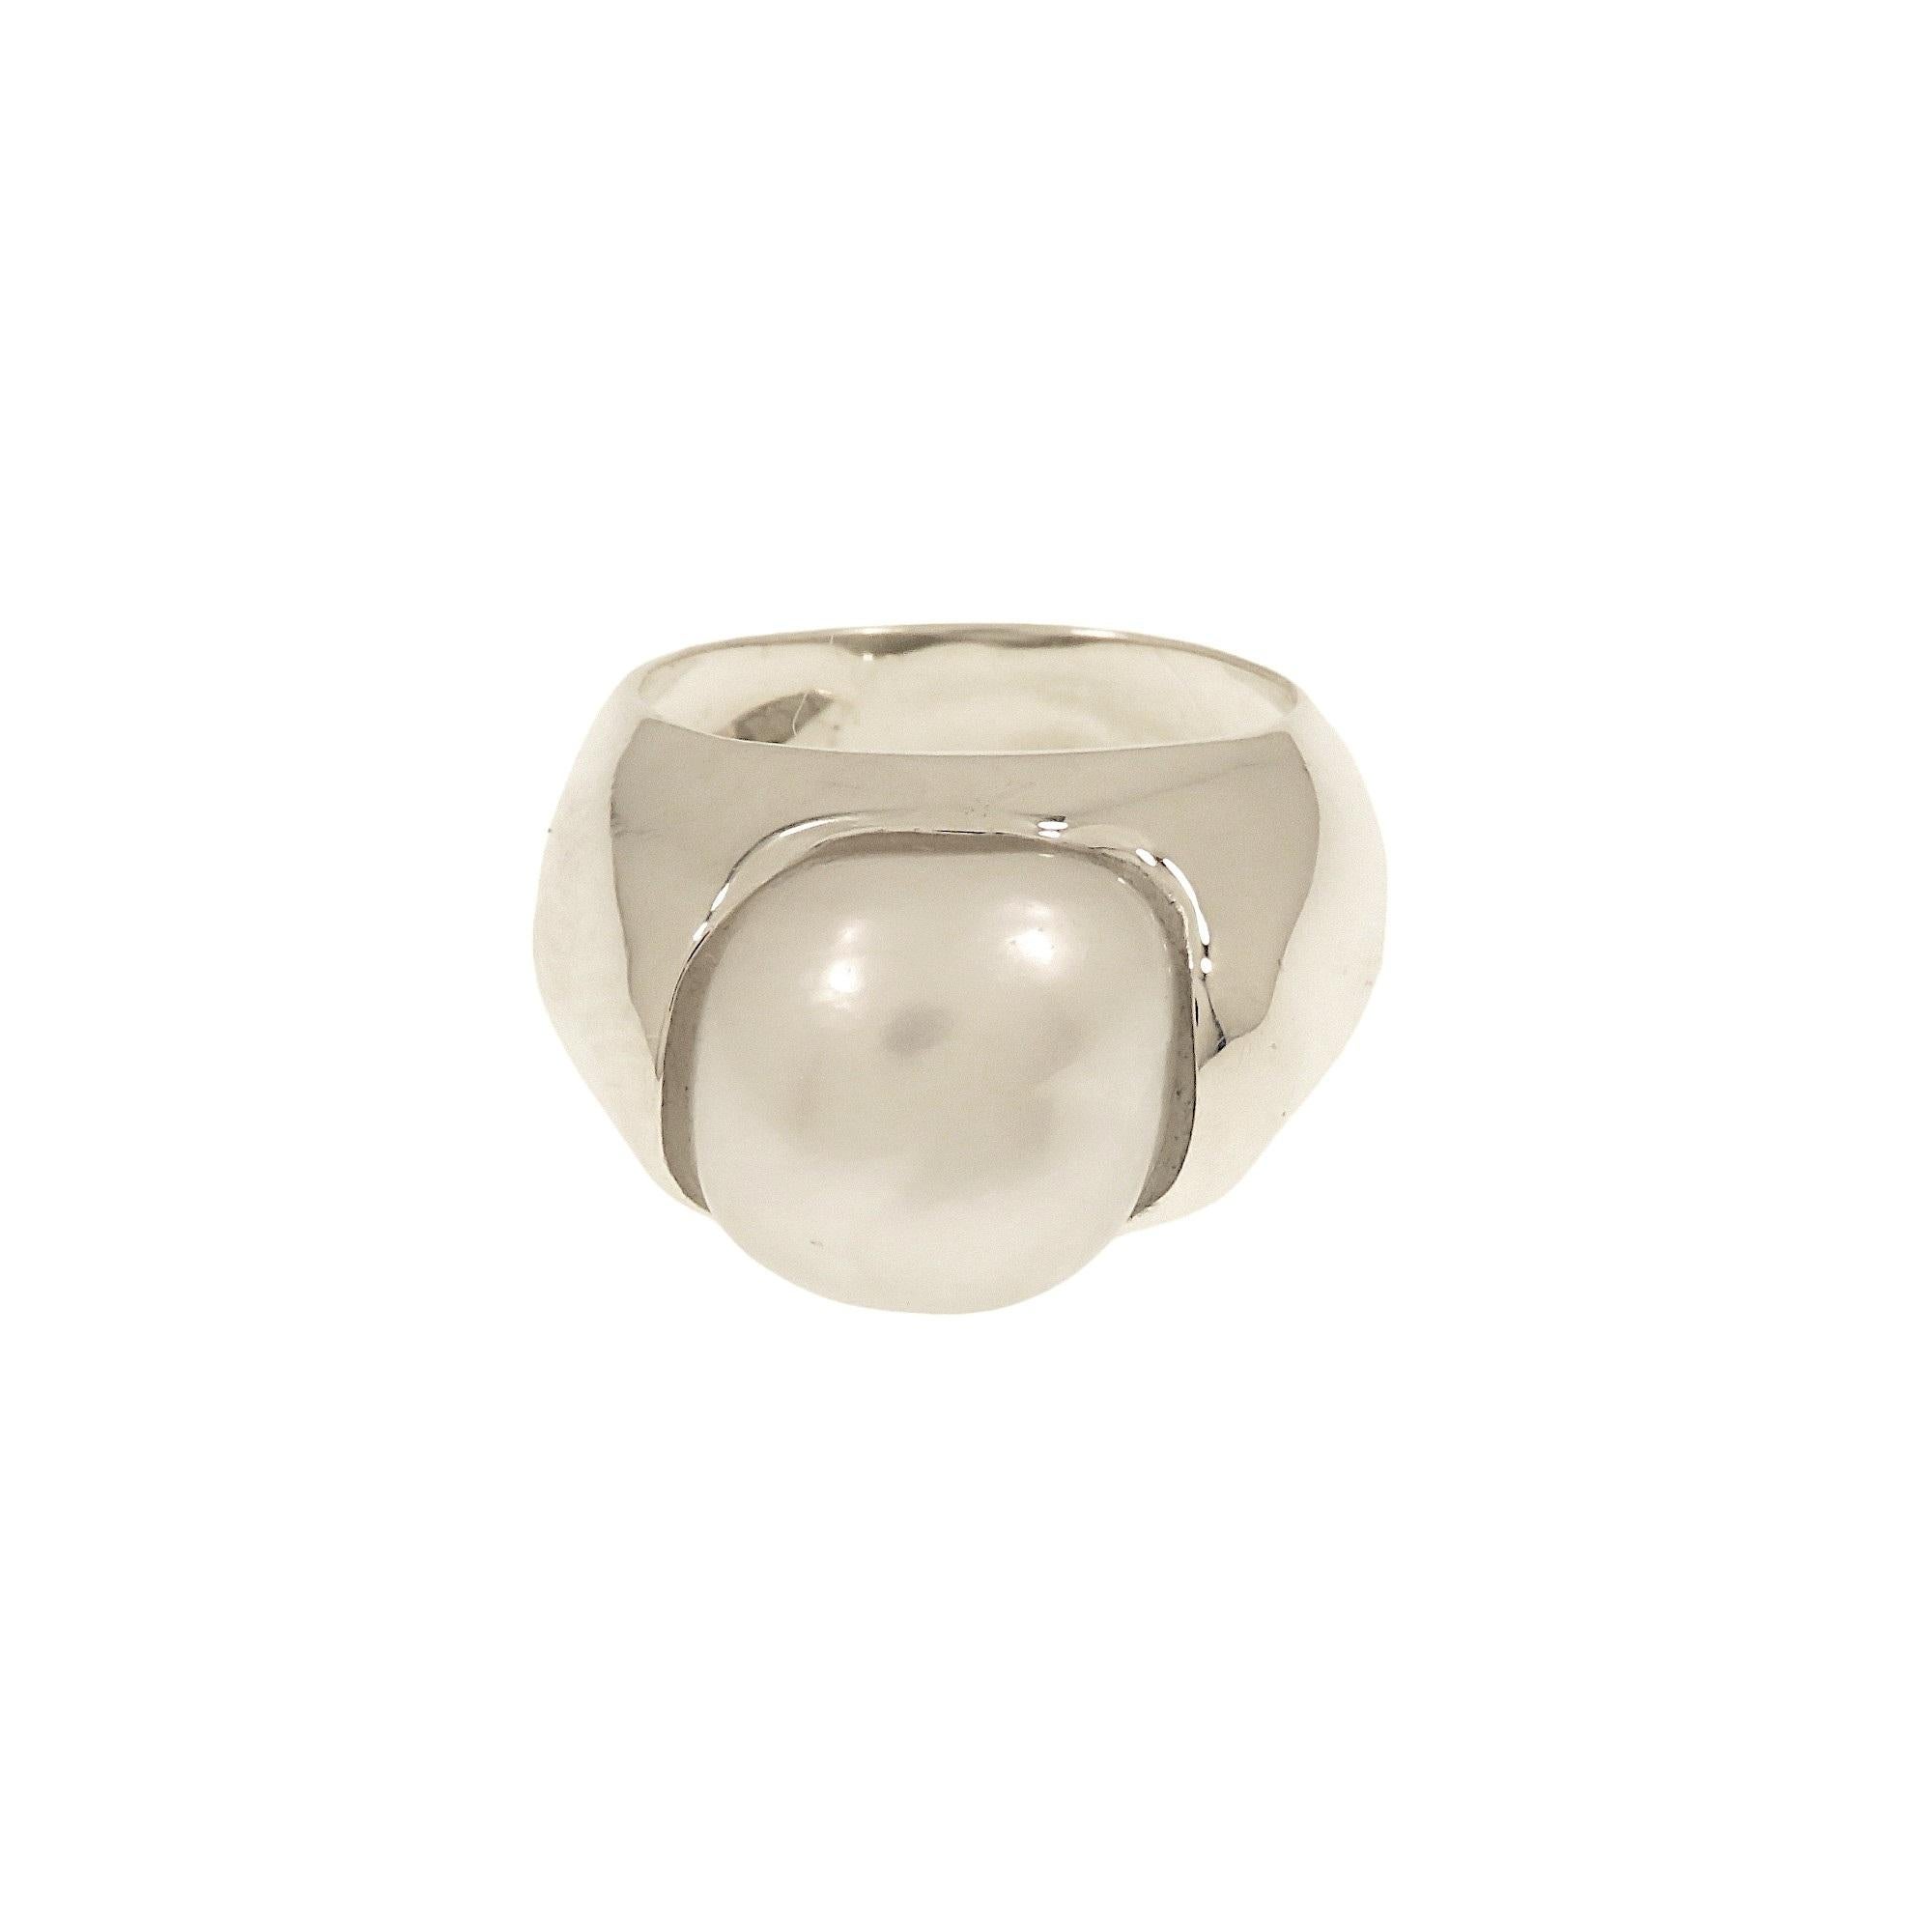 Uncut Botta jewelry ring with Australian pearl in white gold For Sale